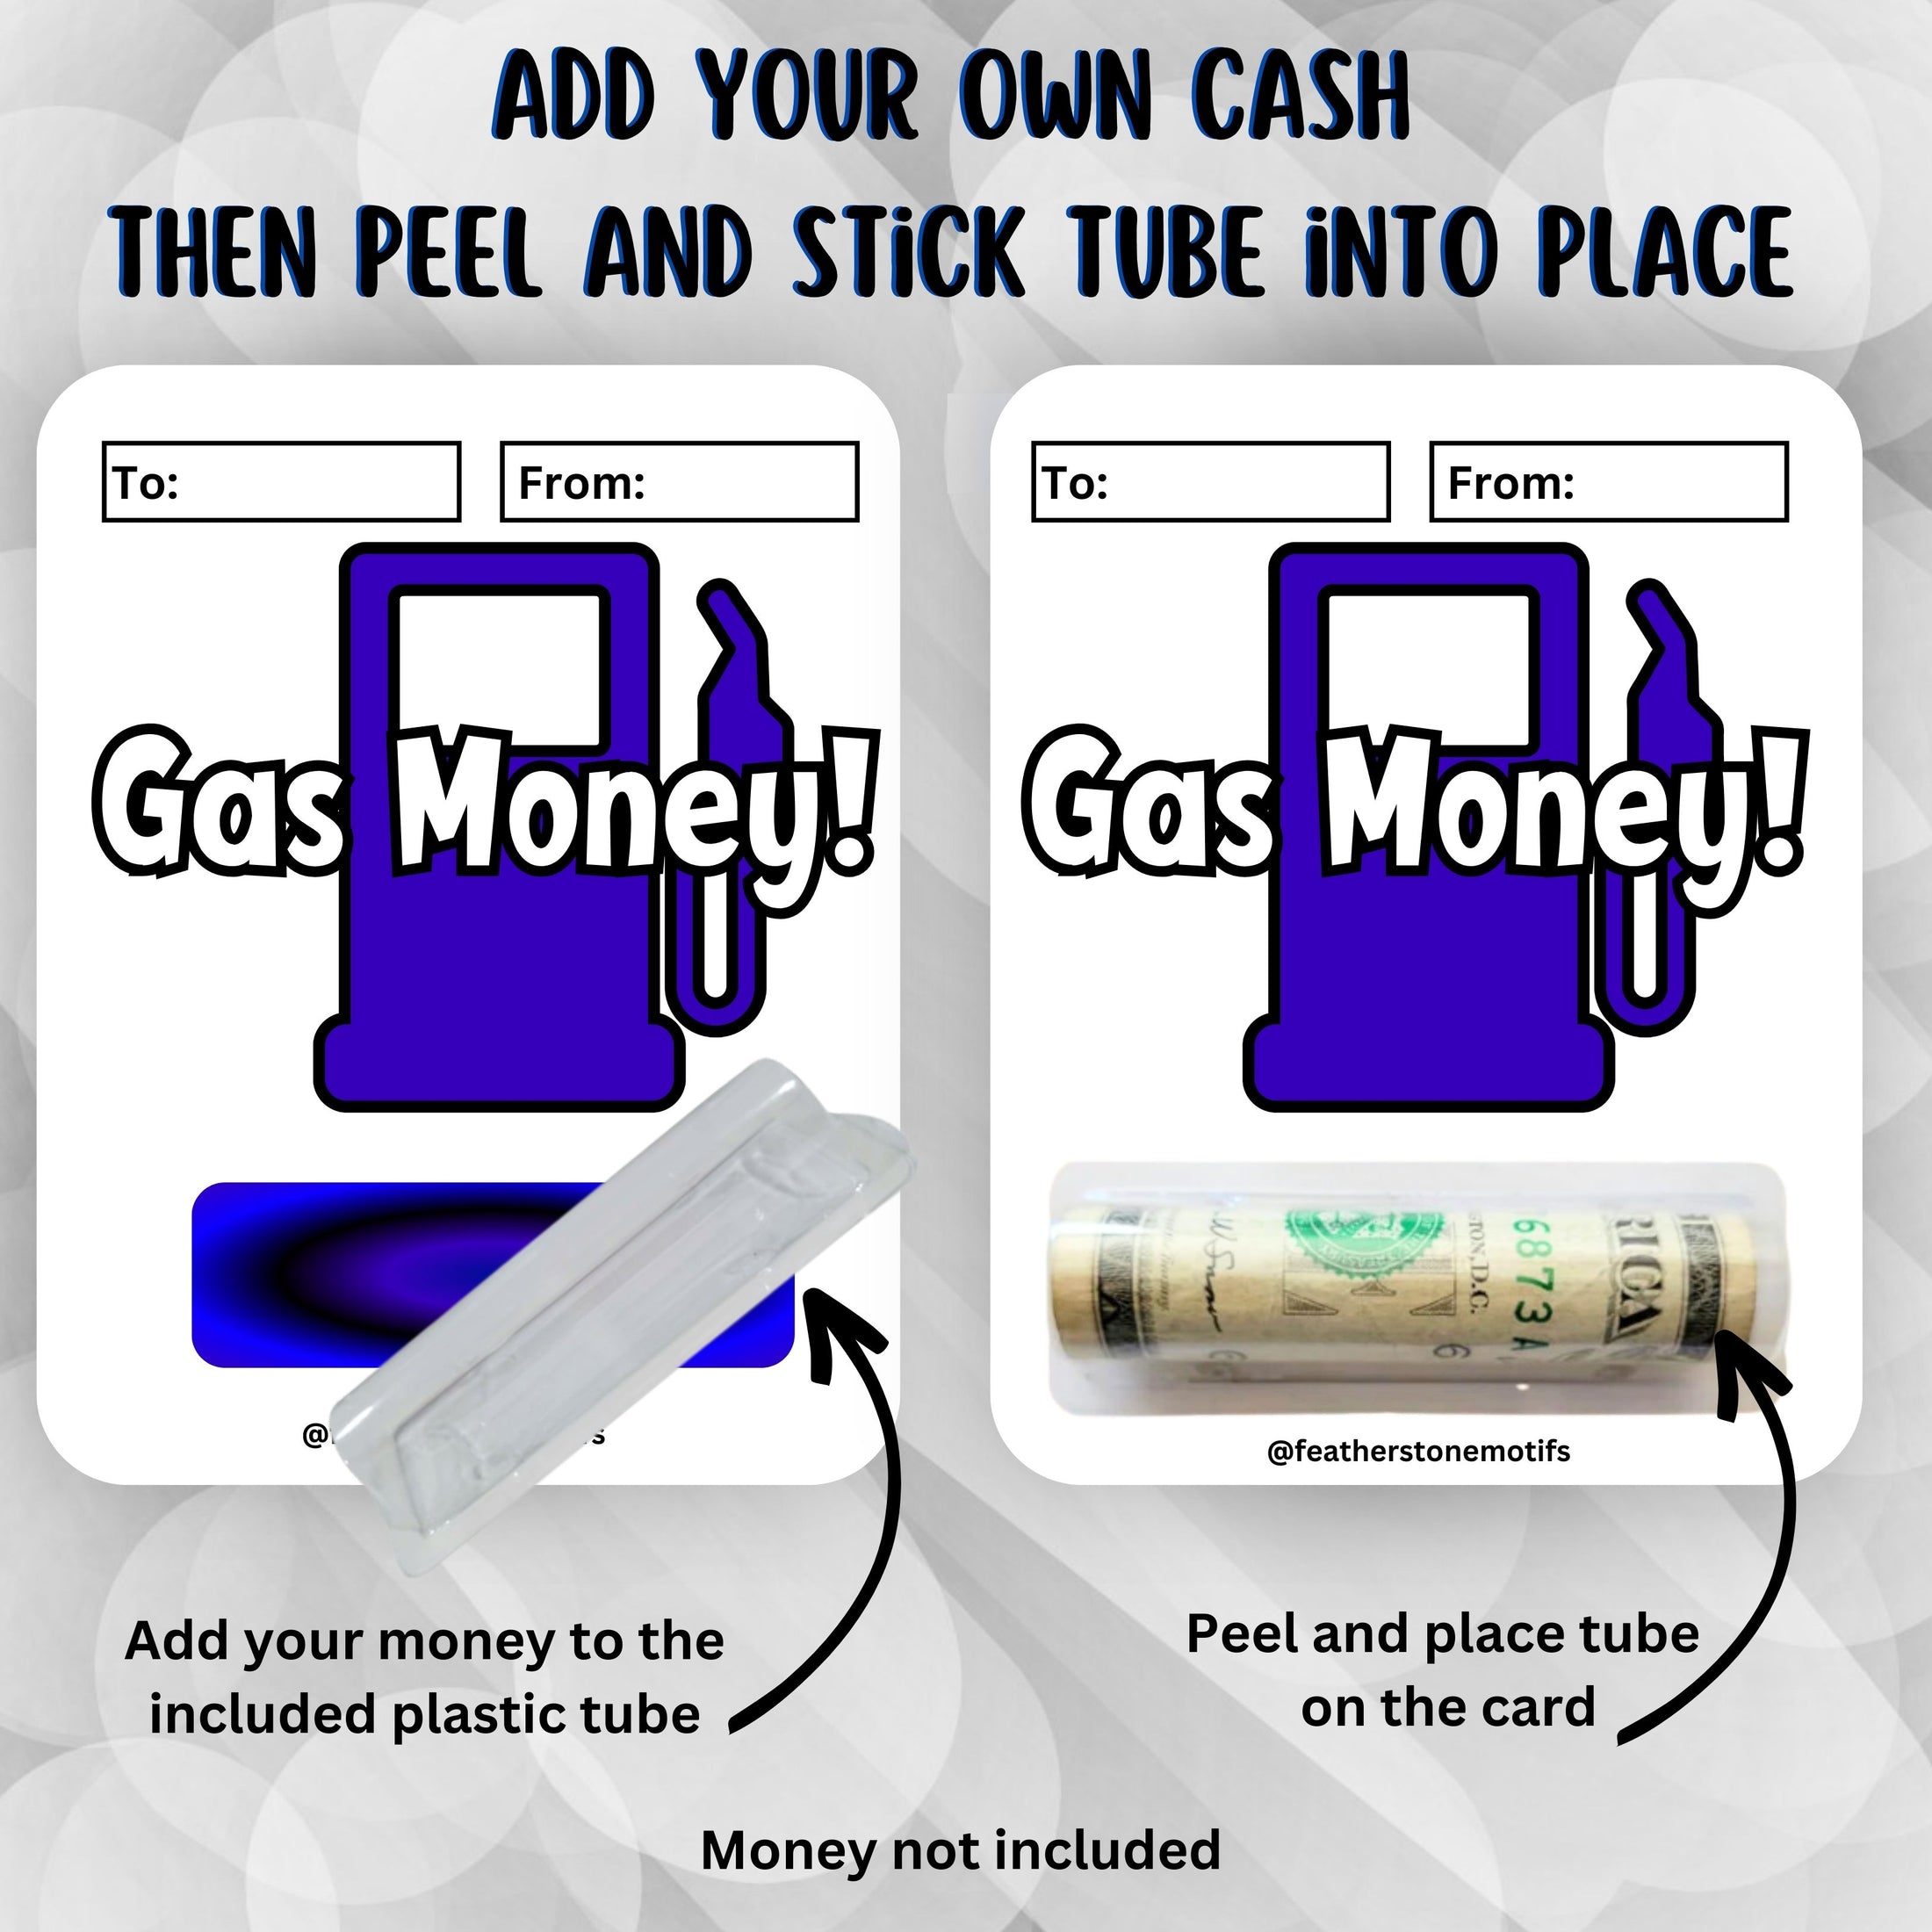 This image shows how to attach the money tube to the Gas Money 3 Money Card.